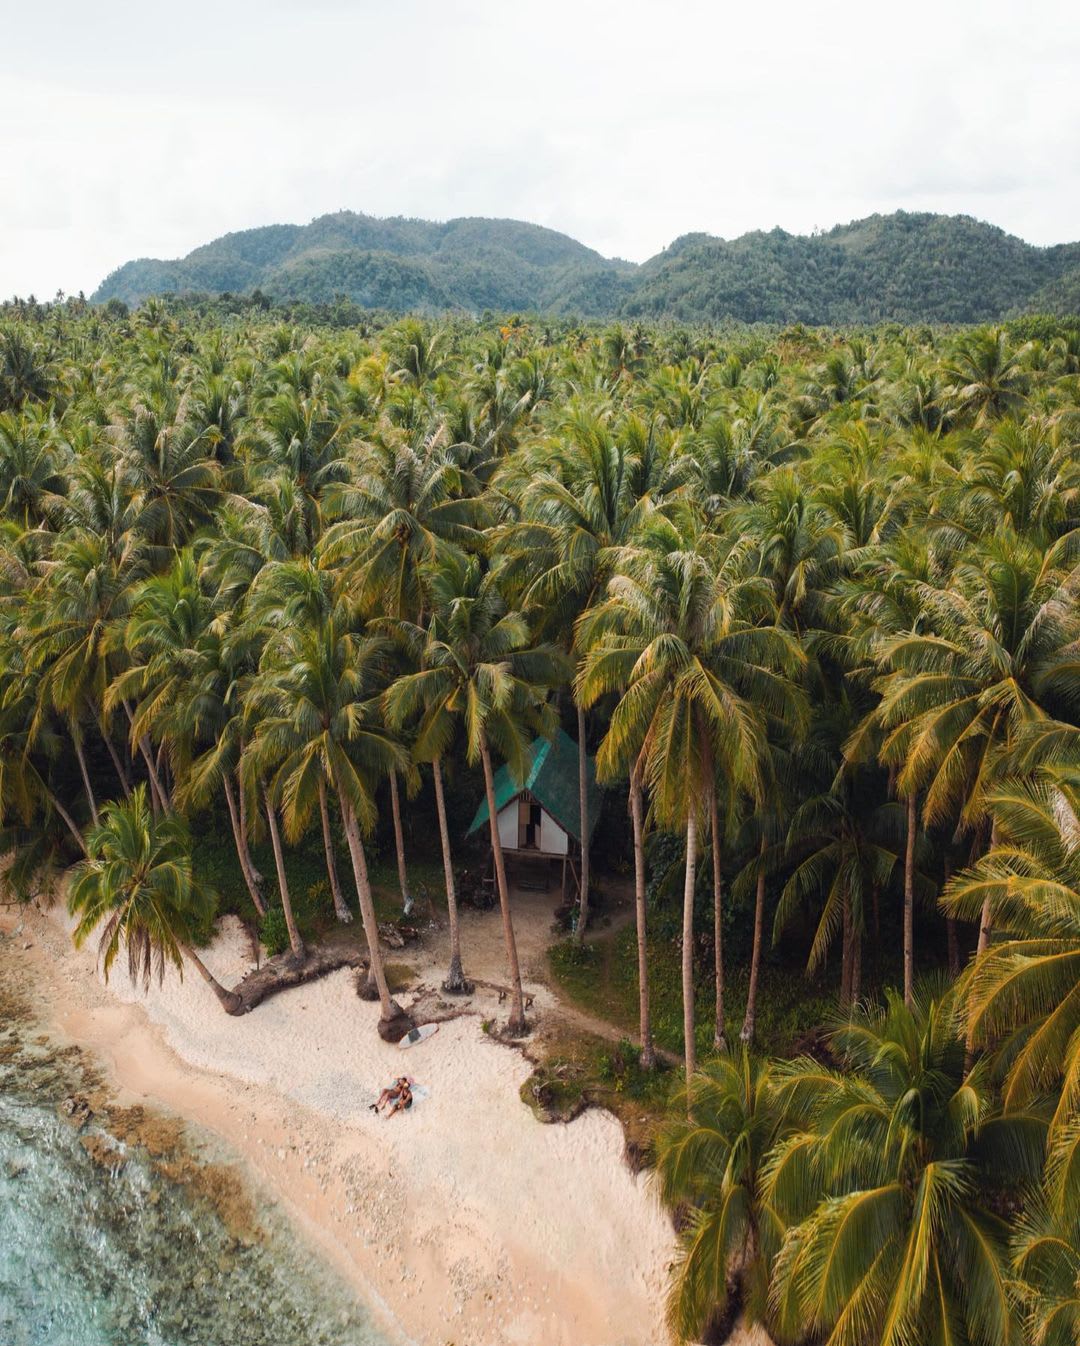 Living in a hut covered by coconut plantation; Siargao Island Philippines